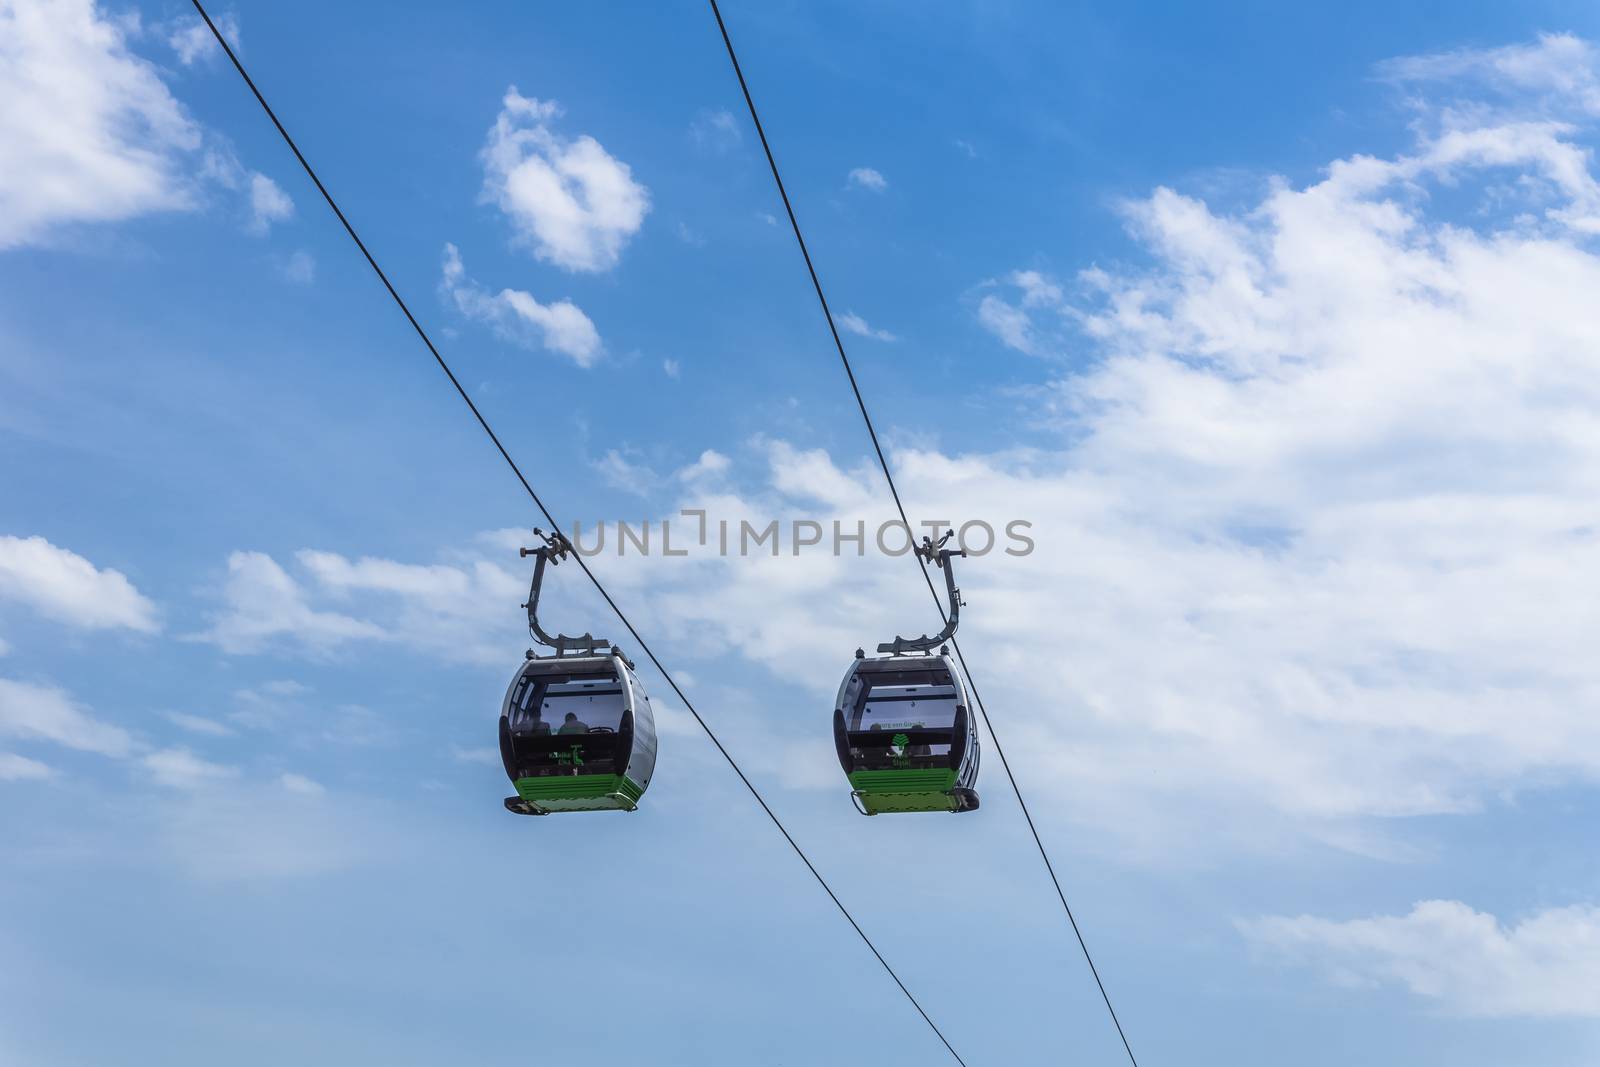 The ropeway in Silesia Park in Chorzow, the largest in the Silesian agglomeration, the most industrialized region in Poland. Gondolas are named after well-known local people.